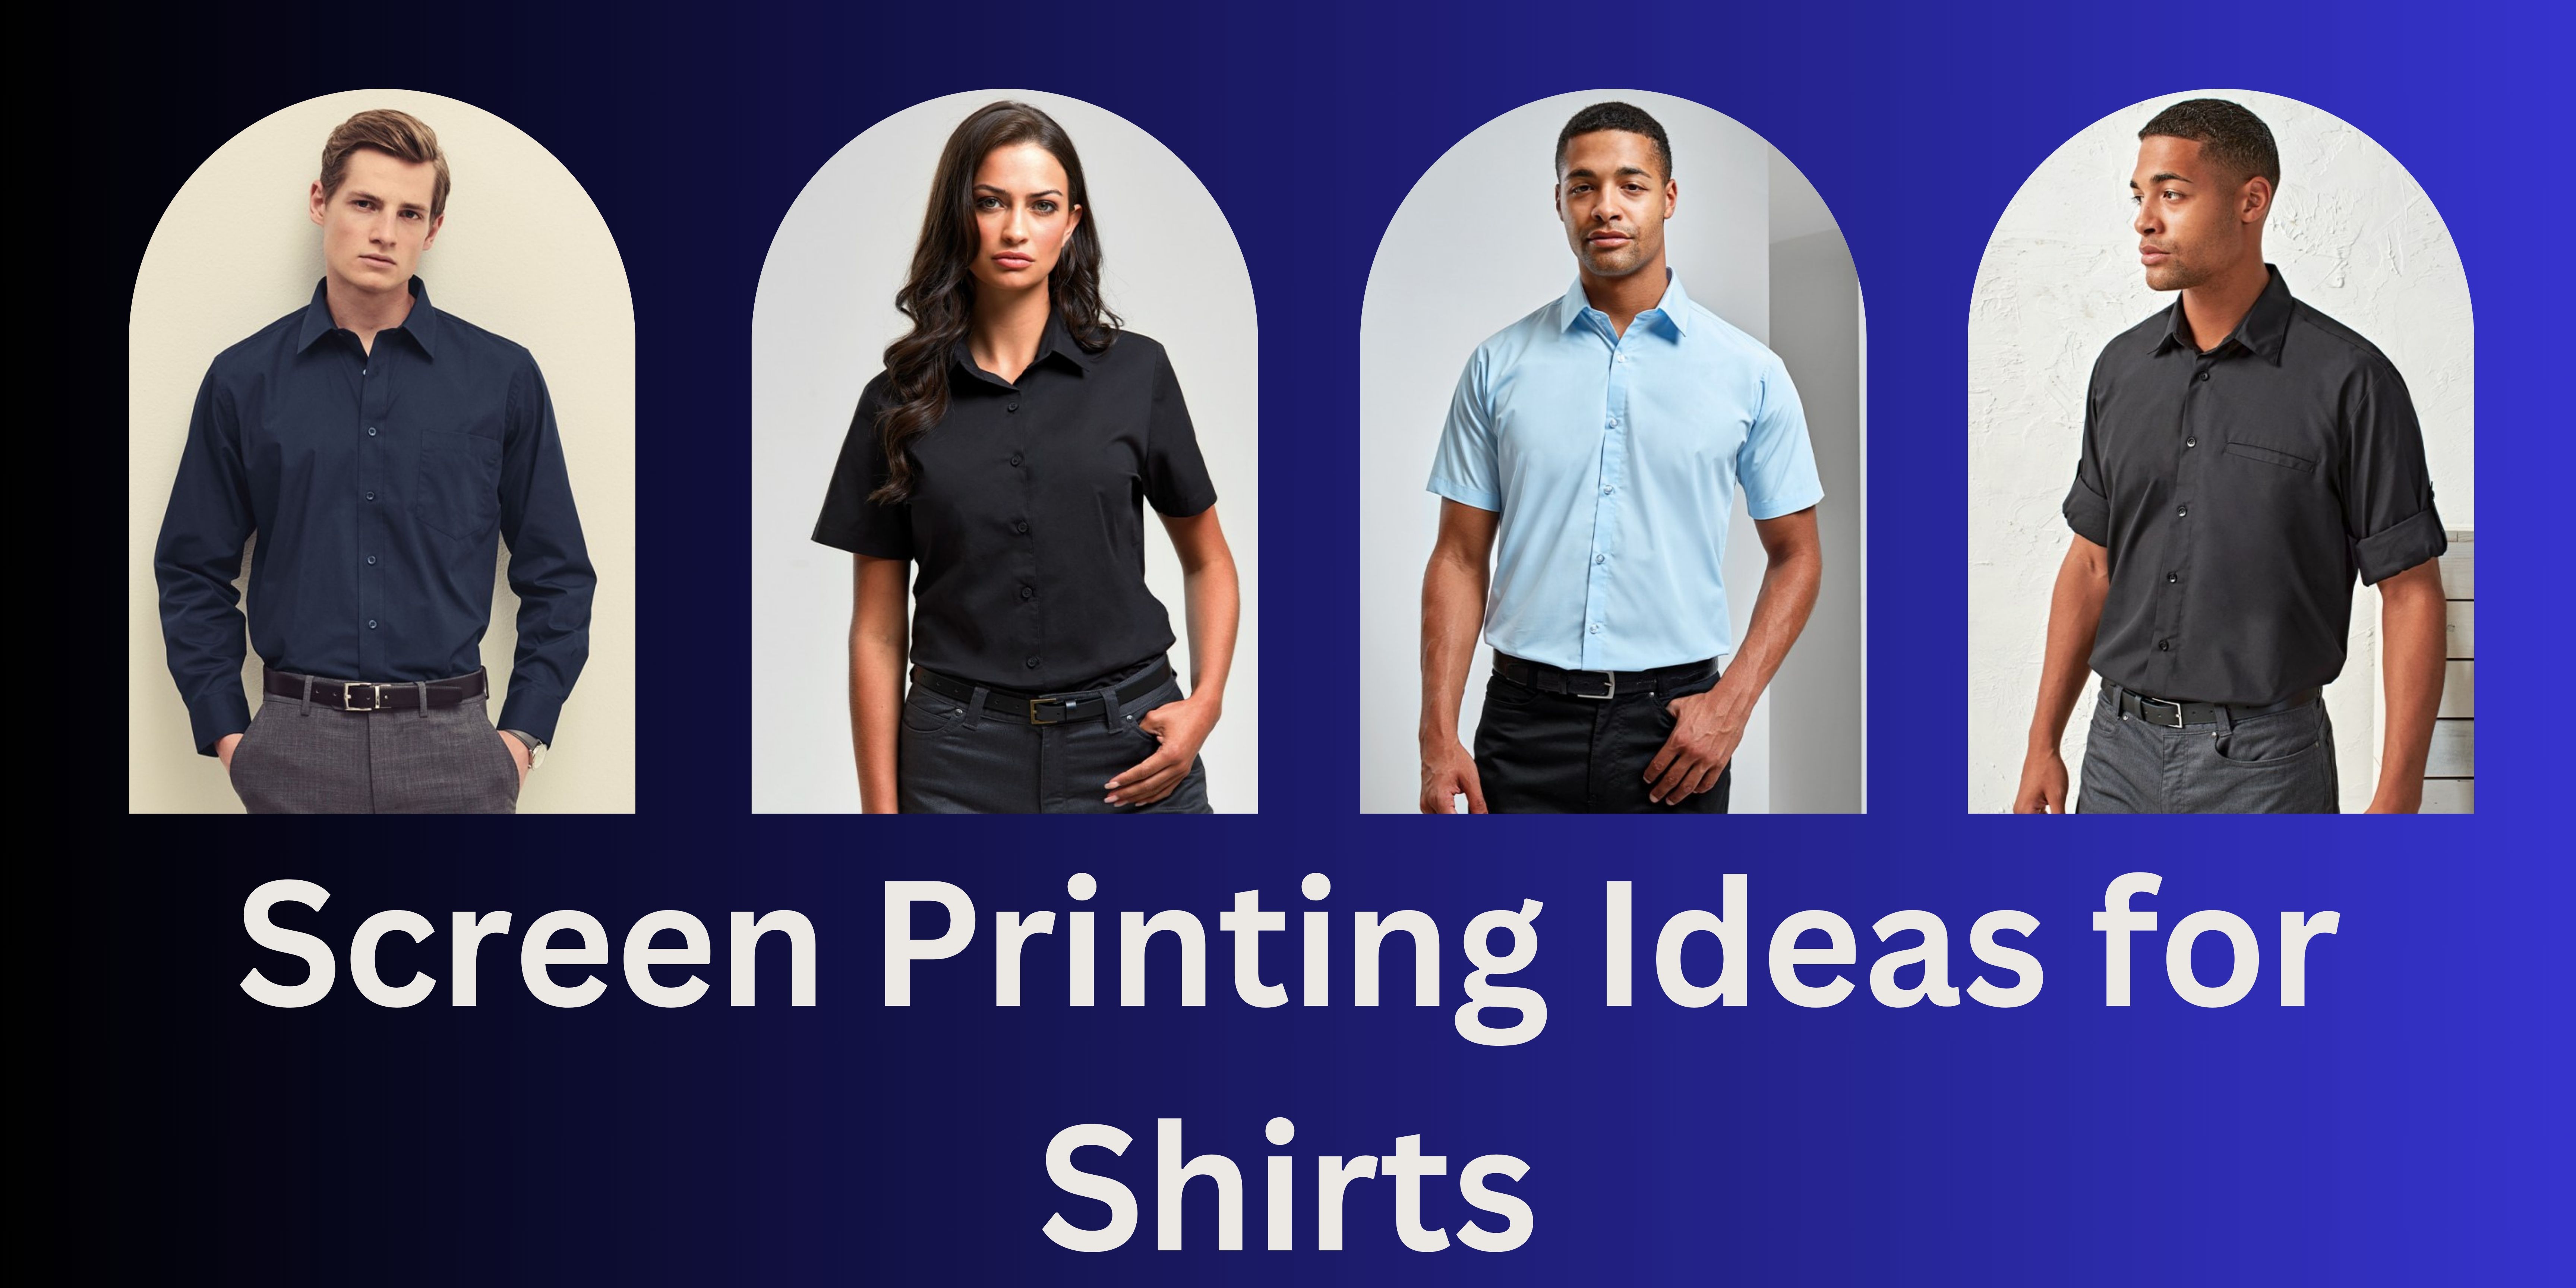 Screen Printing Ideas for Shirts - Customised Clothing